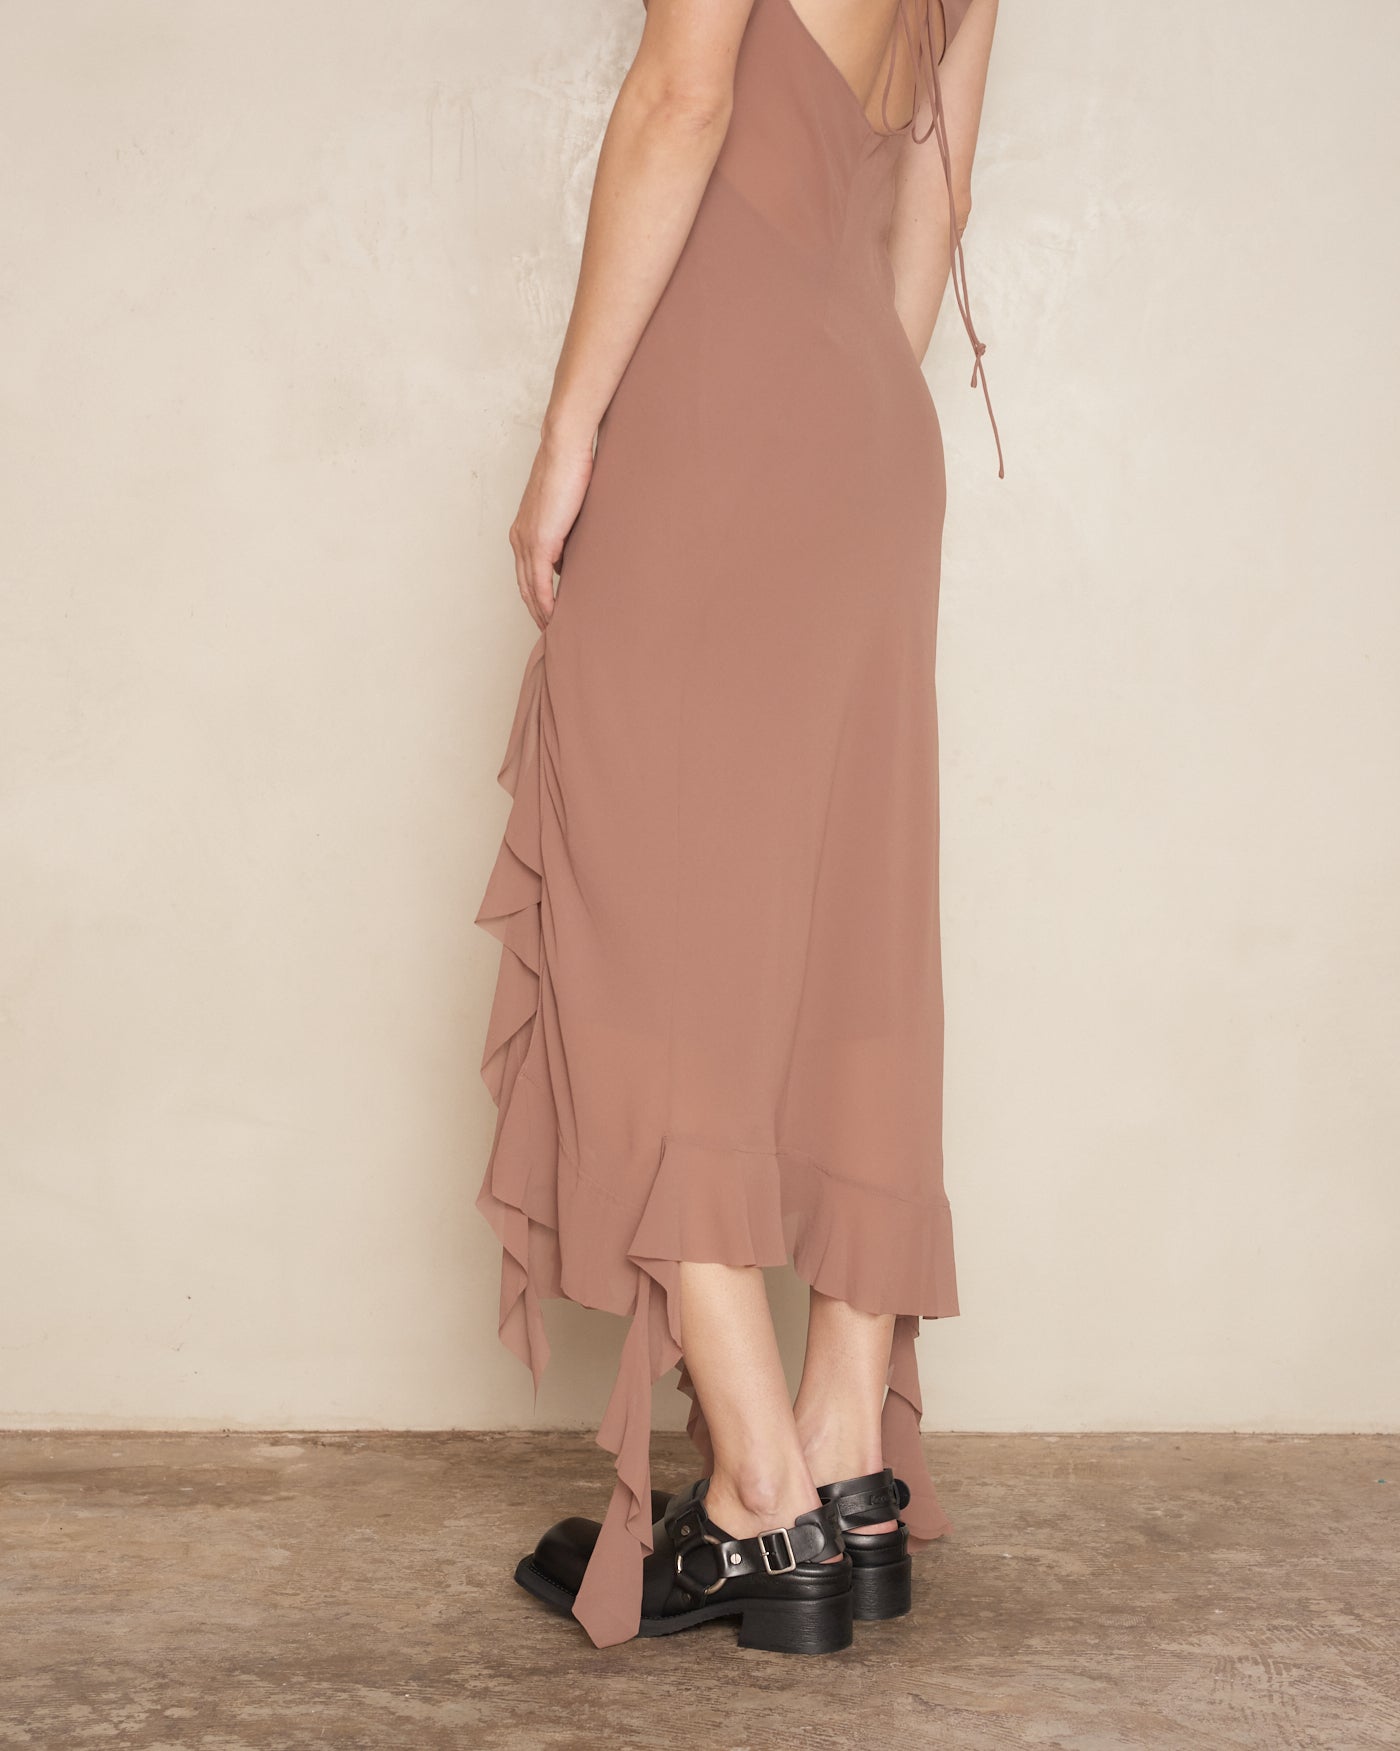 Toffee Brown Ruffle Strap Dress